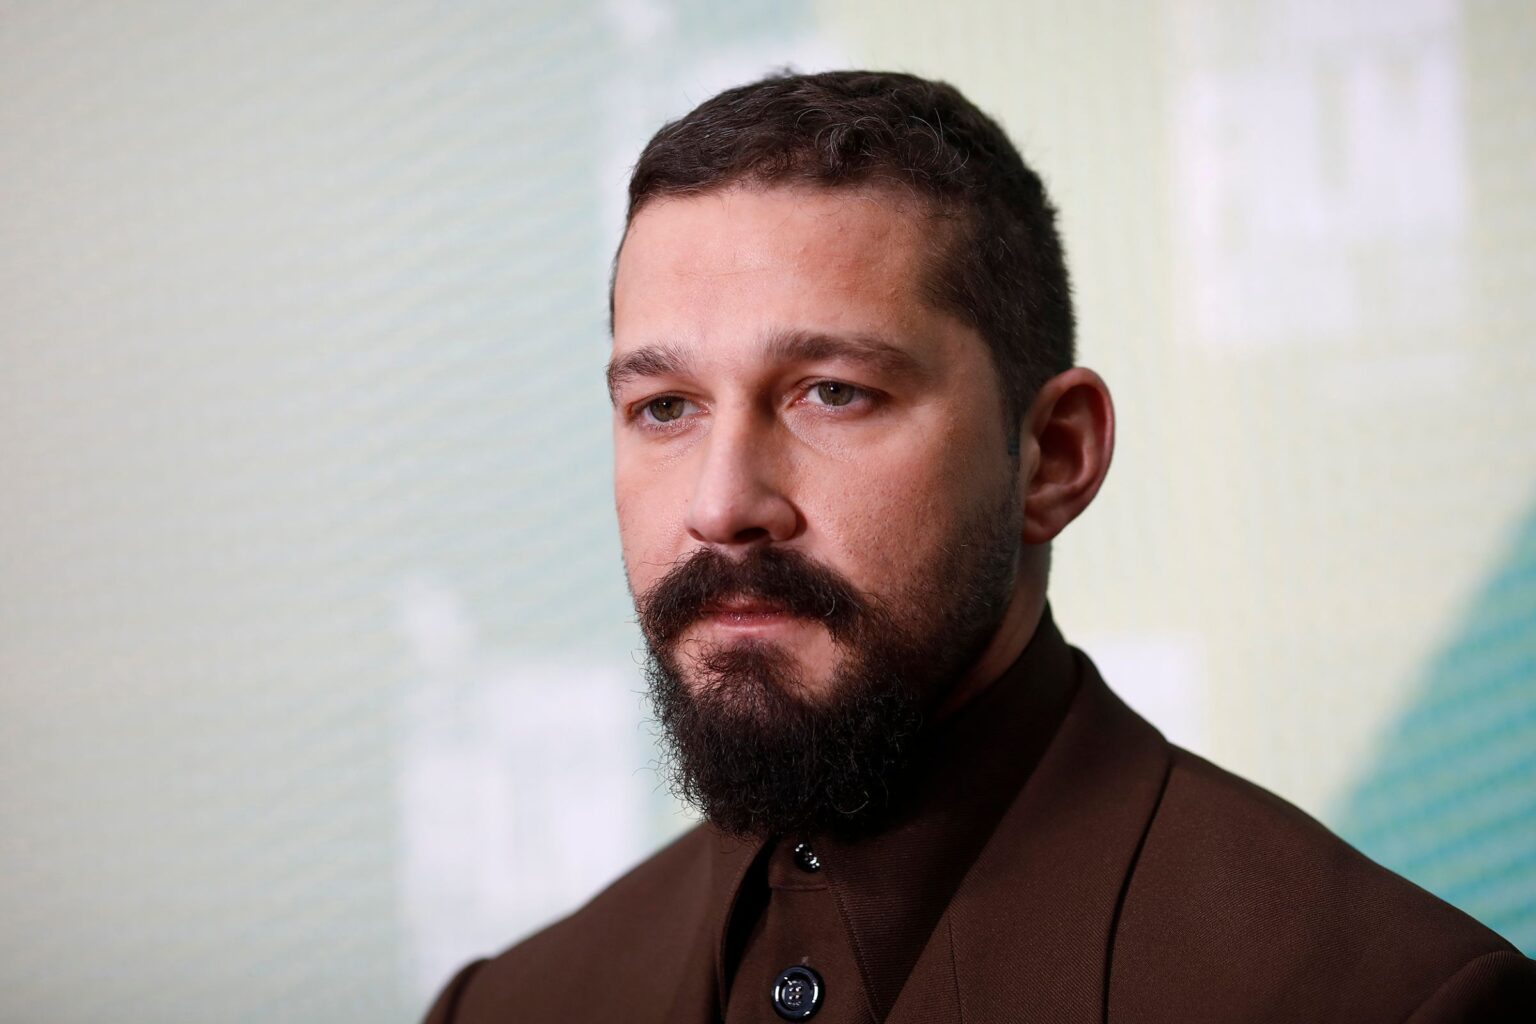 Shia LaBeouf has been arrested more than once, here's why he's had a run-in with police once again.